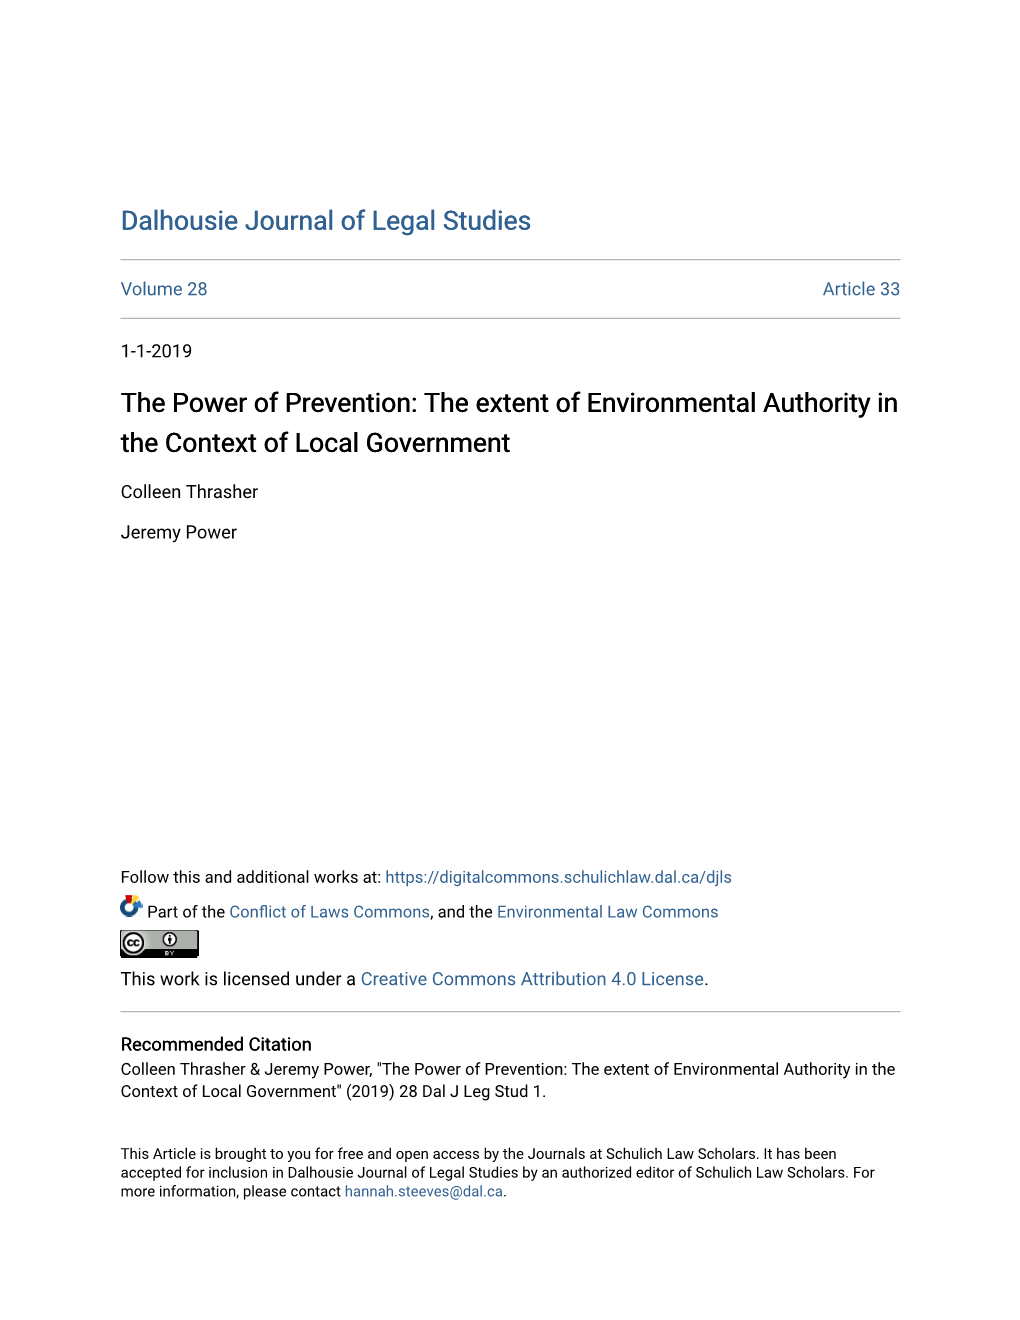 The Extent of Environmental Authority in the Context of Local Government